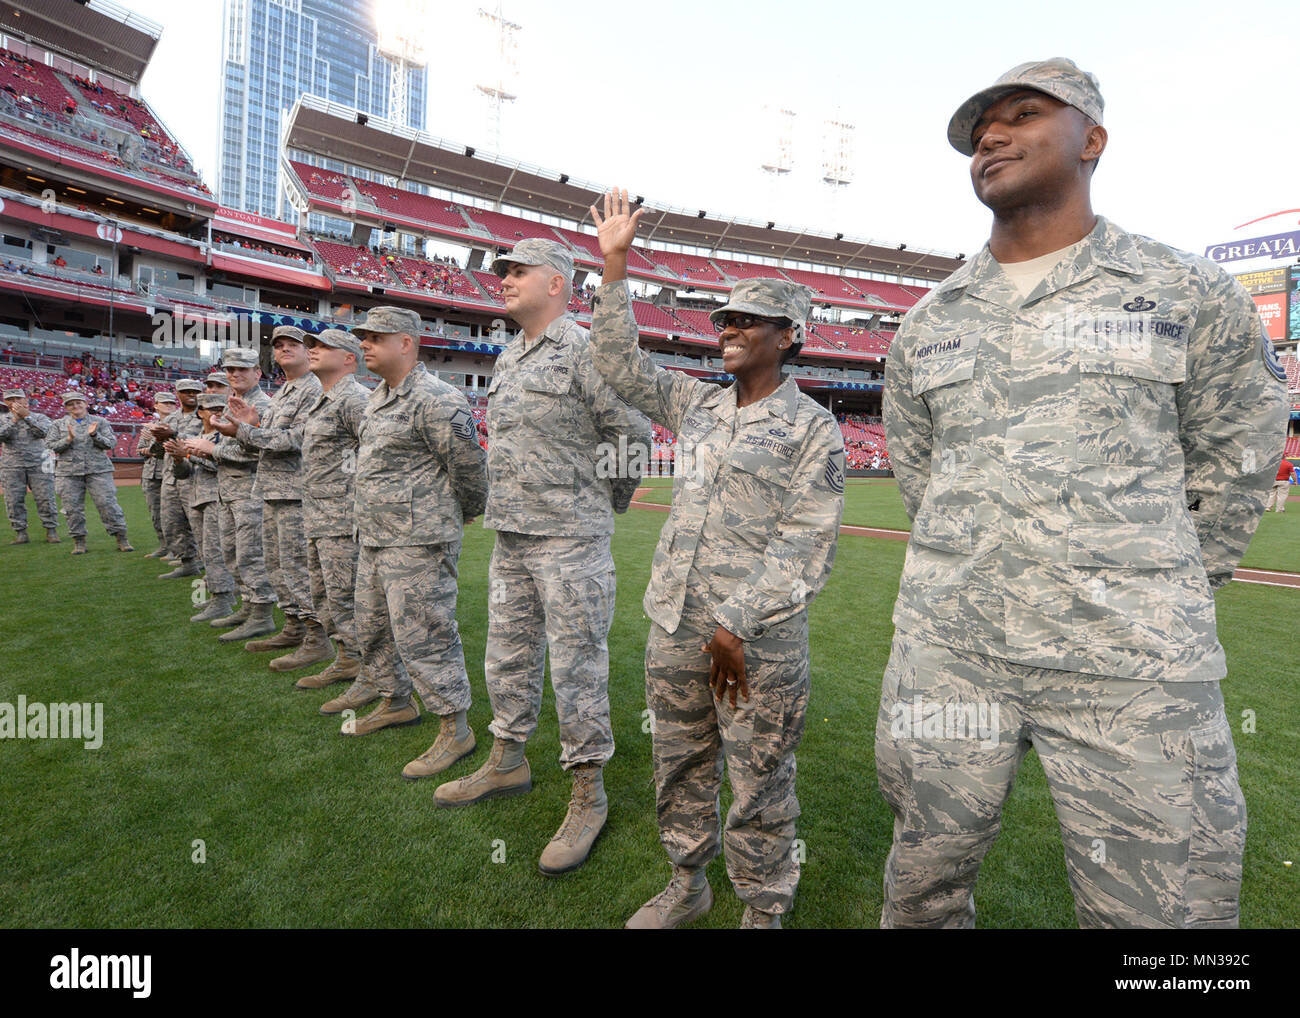 Cincinnati Reds host military appreciation night > Wright-Patterson AFB >  Article Display